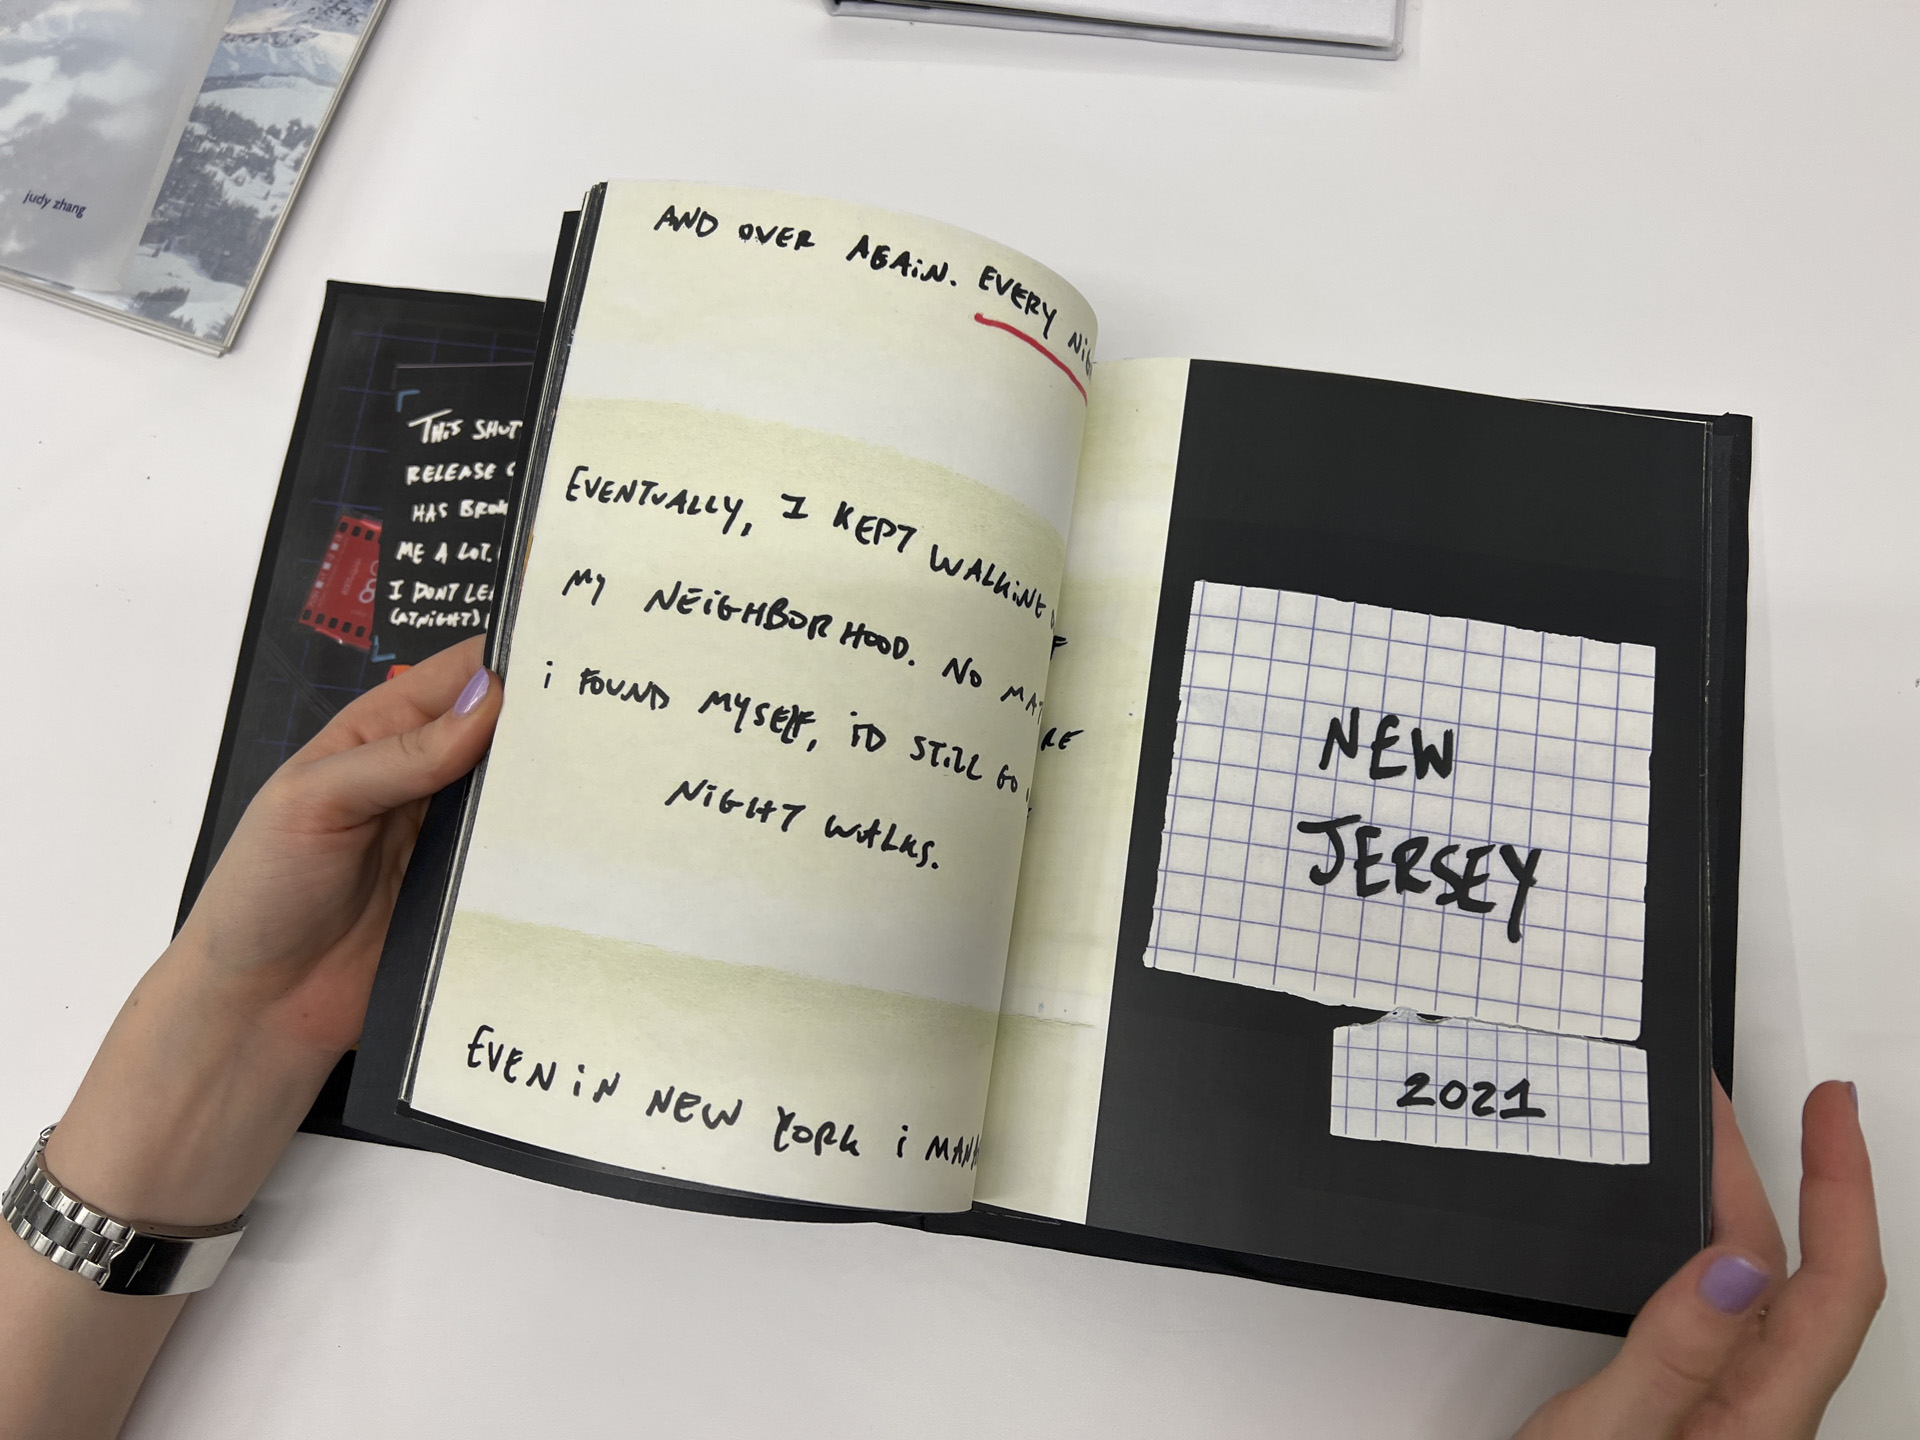 book opened to page stating text "new jersey 2021" 